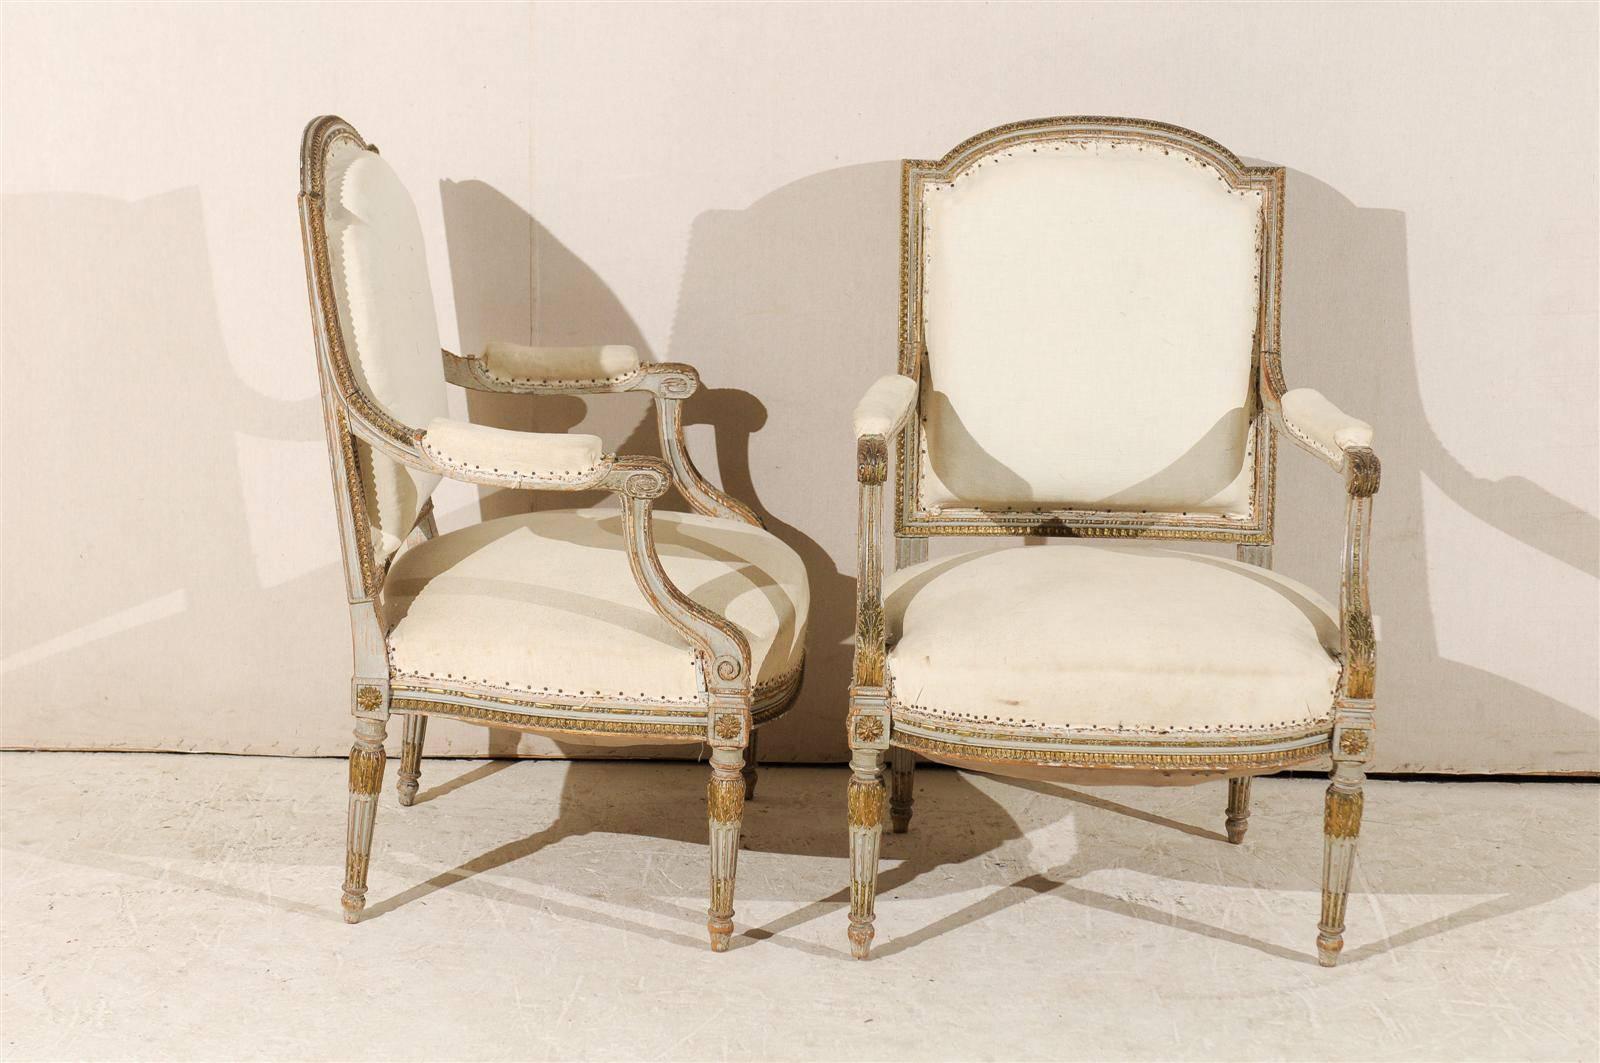 Pair of 19th Century French Louis XVI Style Fauteuils or Armchairs 2